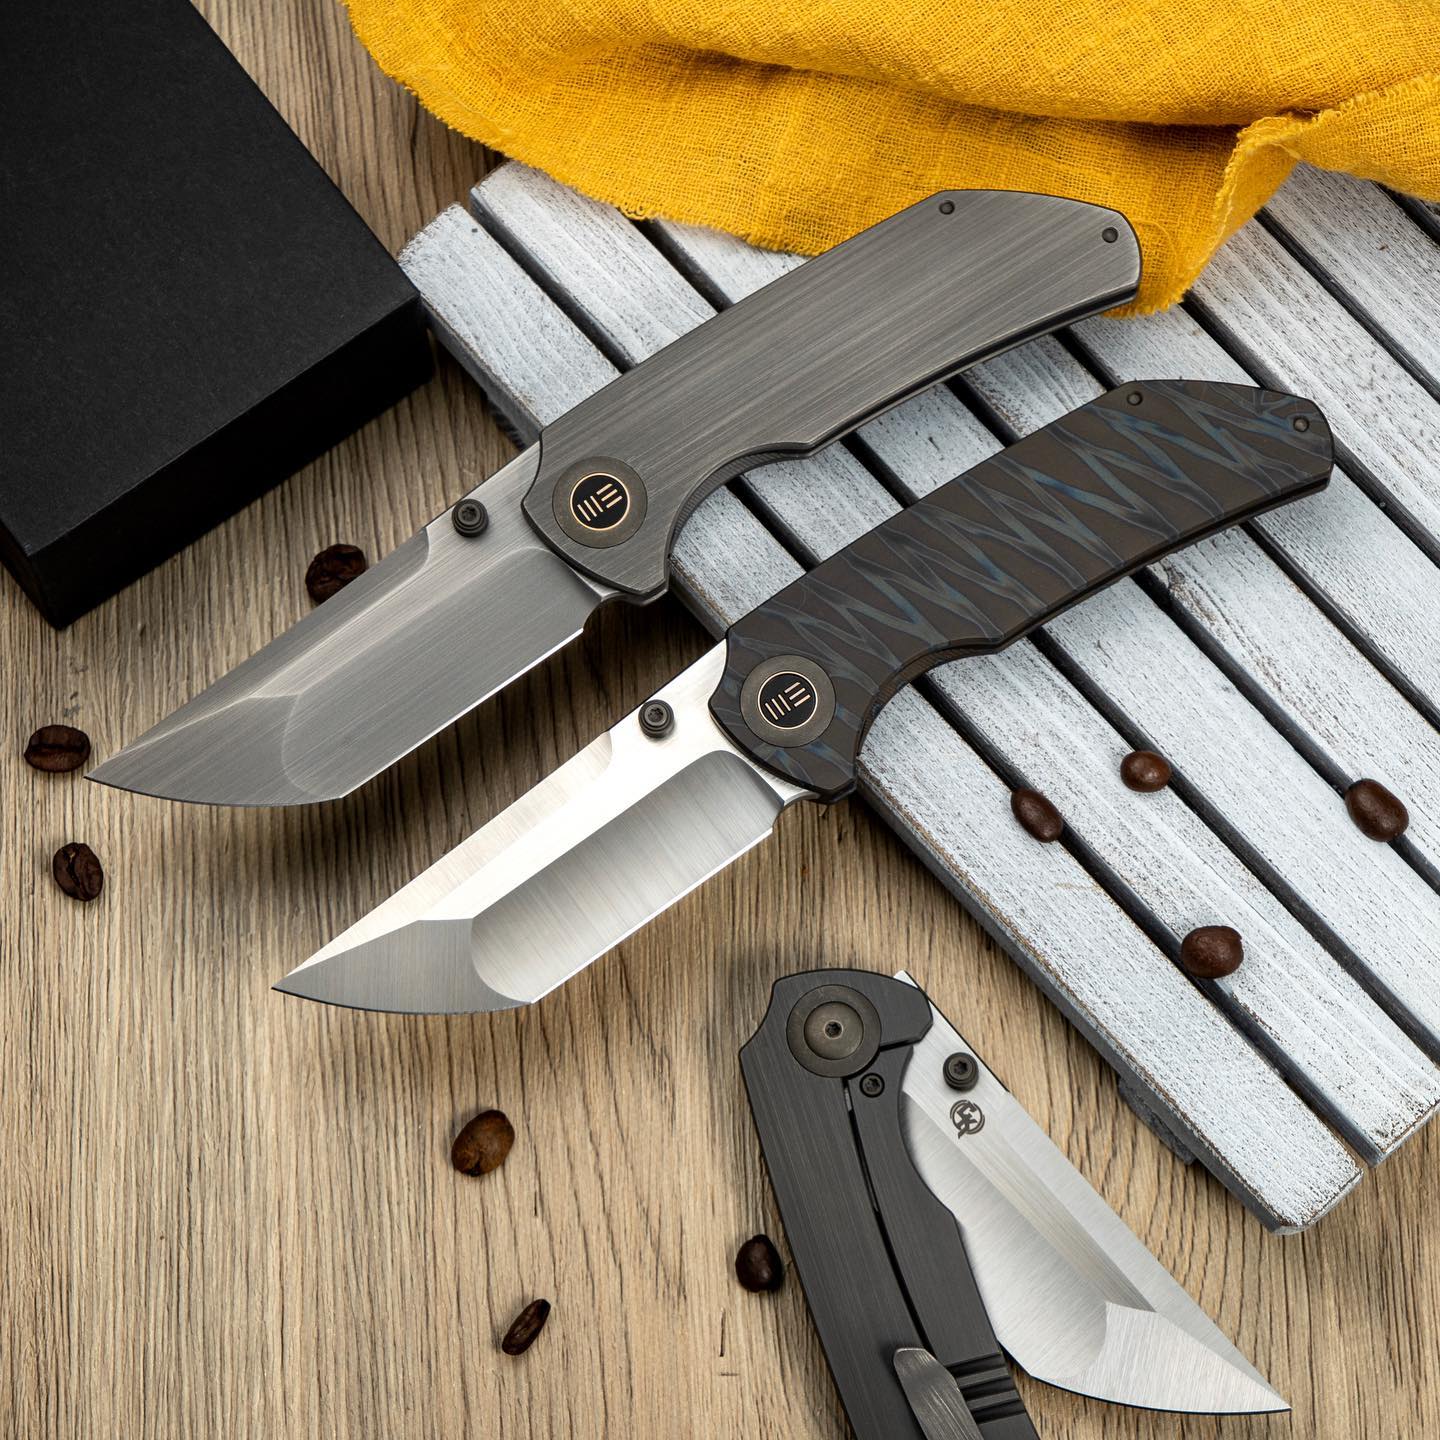 A Guide to We Knife Company's Best Models